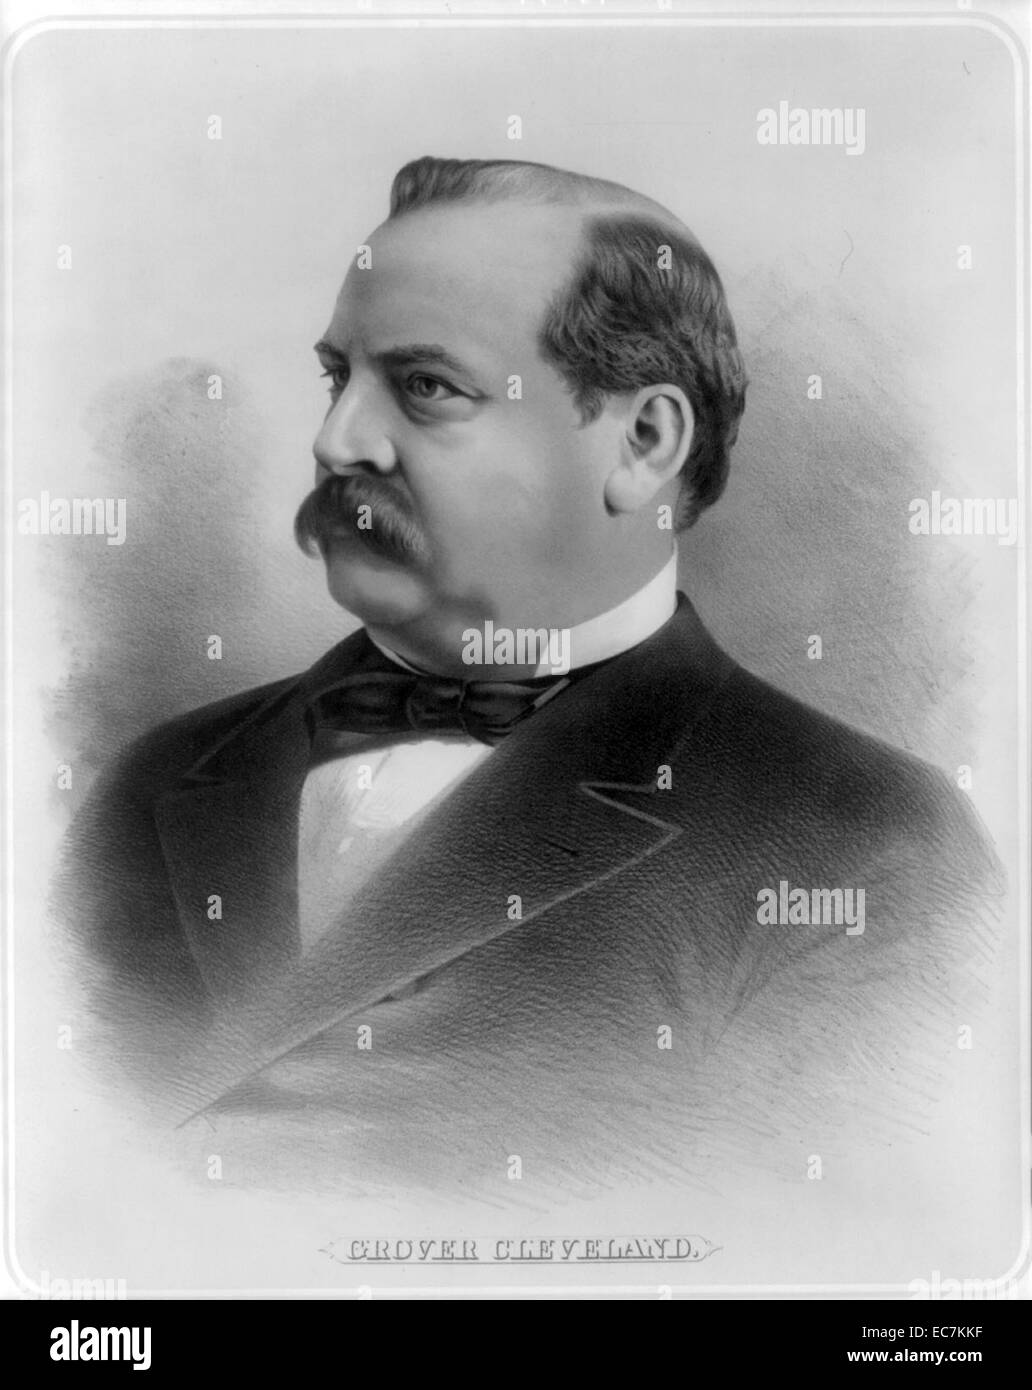 President Grover Cleveland. Cleveland was the 22nd and 24th President of the United States and is the only president to serve two non-consecutive terms. Stock Photo